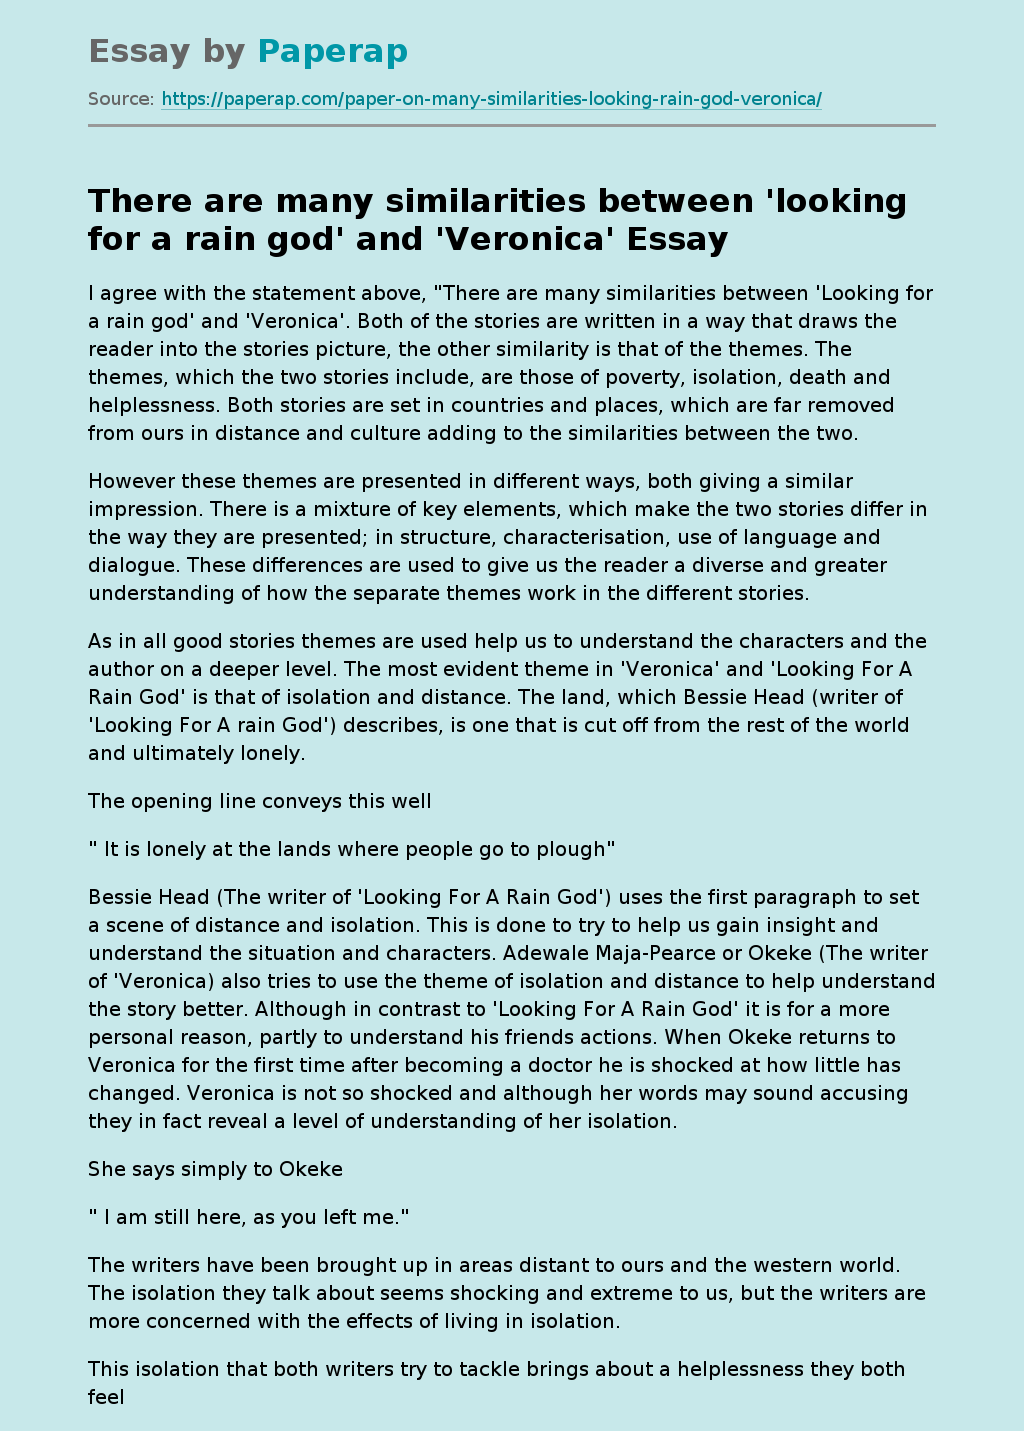 There are many similarities between 'looking for a rain god' and 'Veronica'